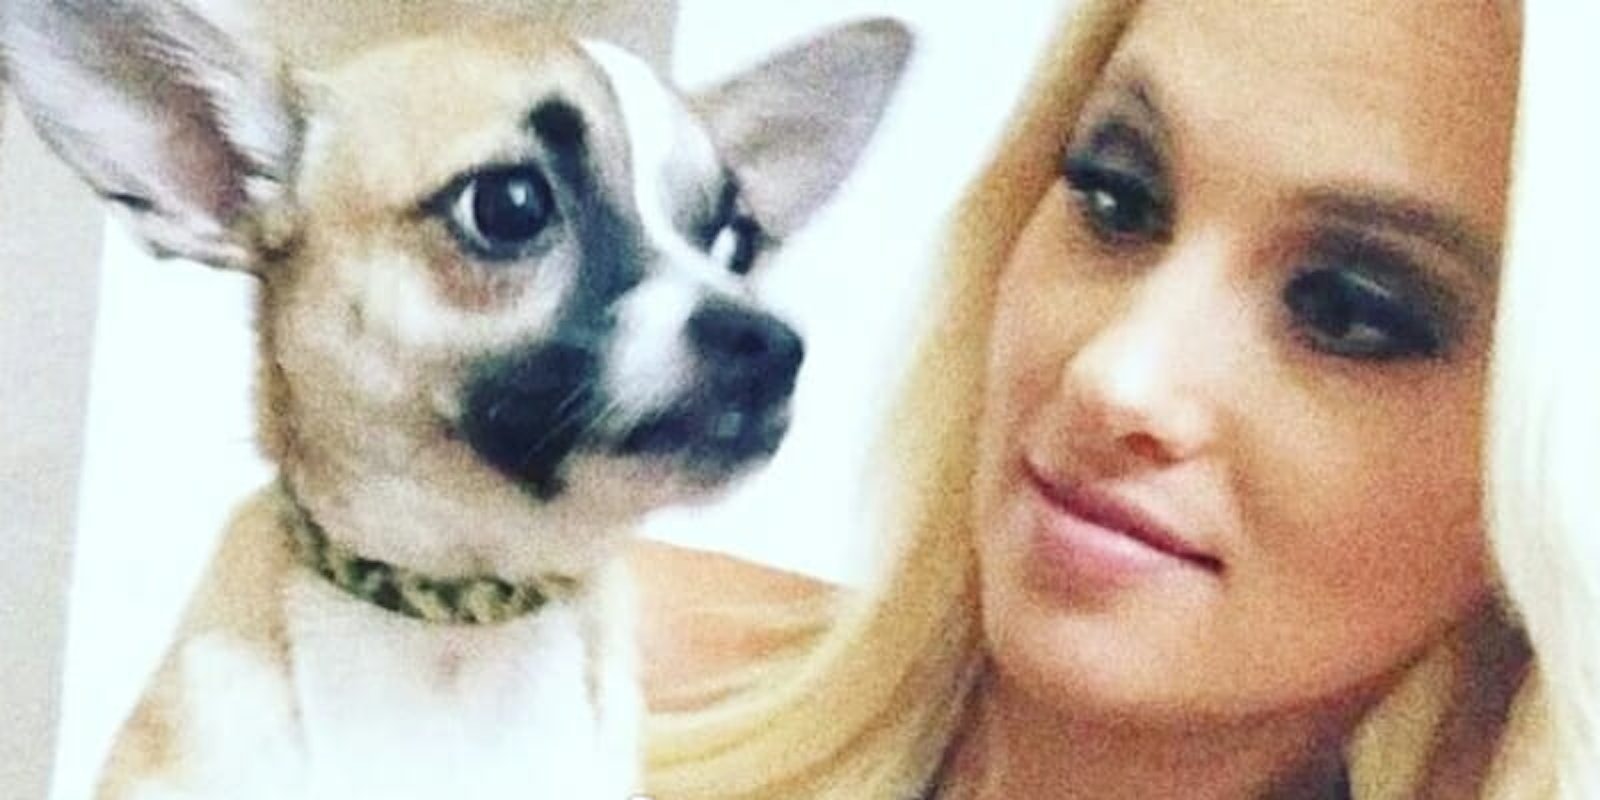 Tomi Lahren said in an Instagram story she kicked her dog 'five times' during her appearance on 'Fox & Friends.'